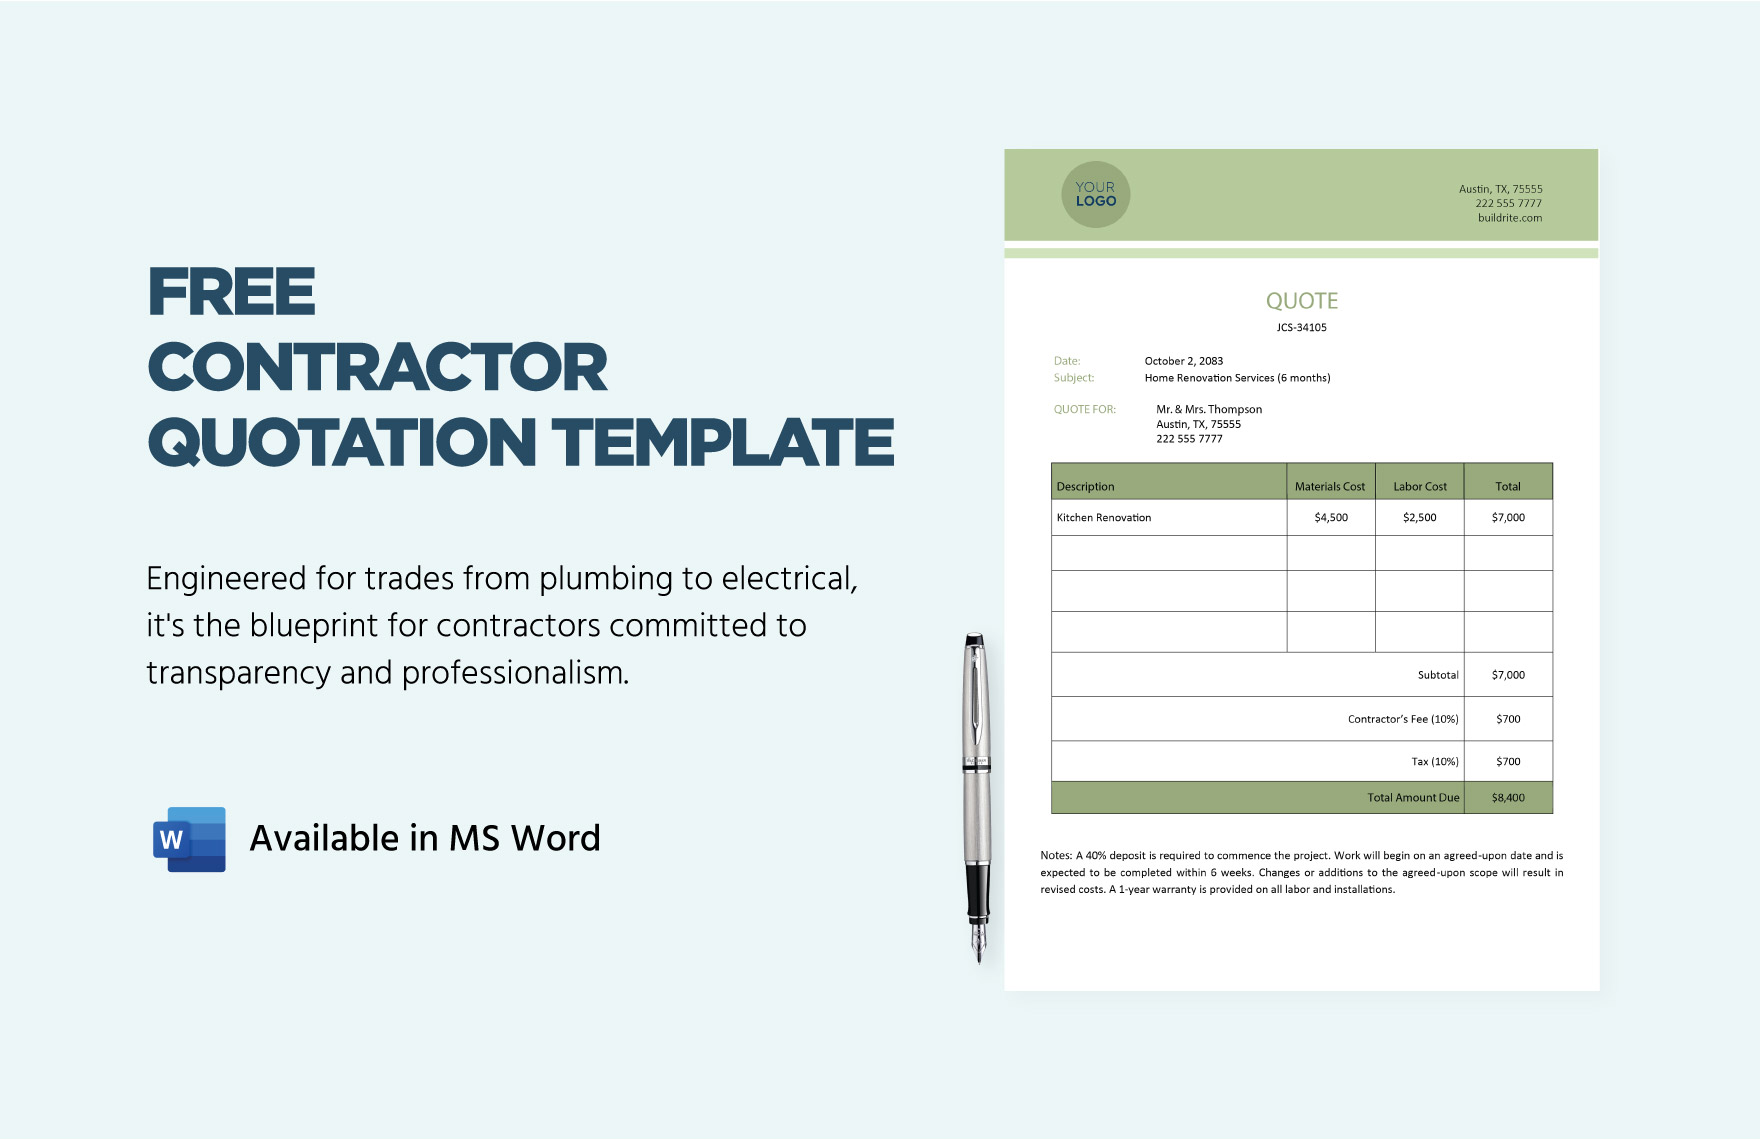 Free Contractor Quotation Template